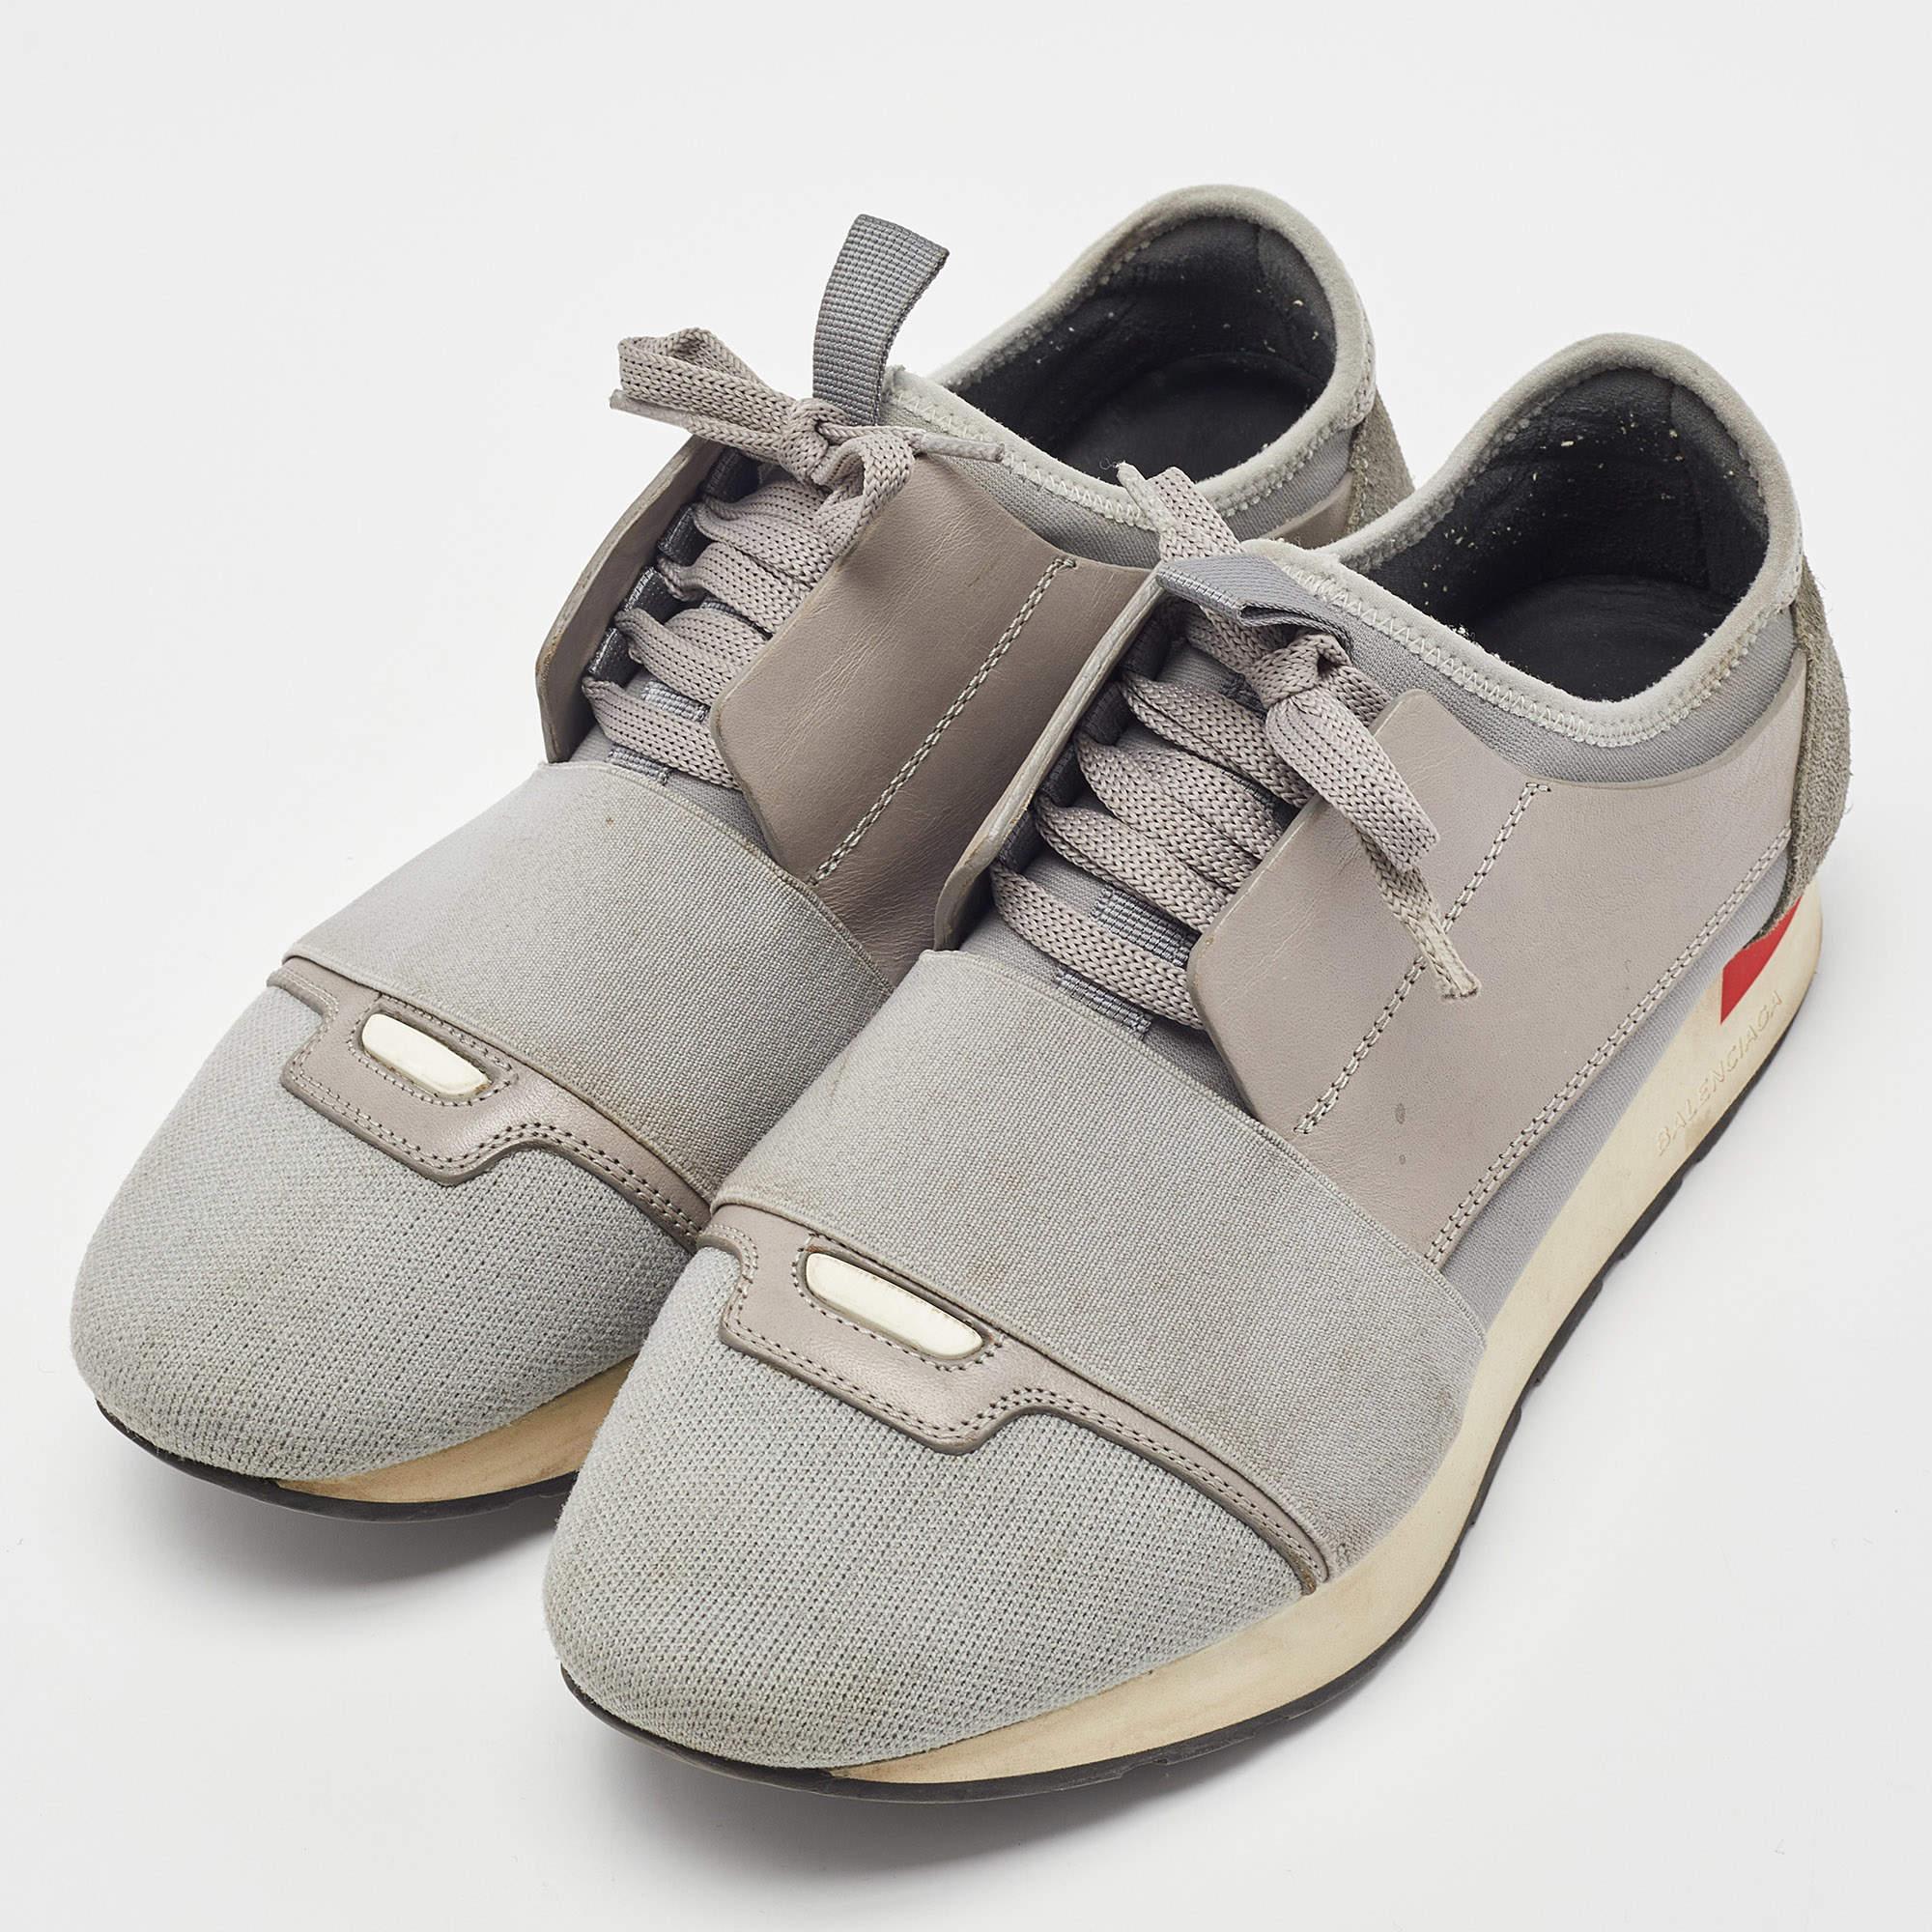 Balenciaga Grey Leather and Knit Fabric Race Runner Sneakers Size 39 In Good Condition For Sale In Dubai, Al Qouz 2